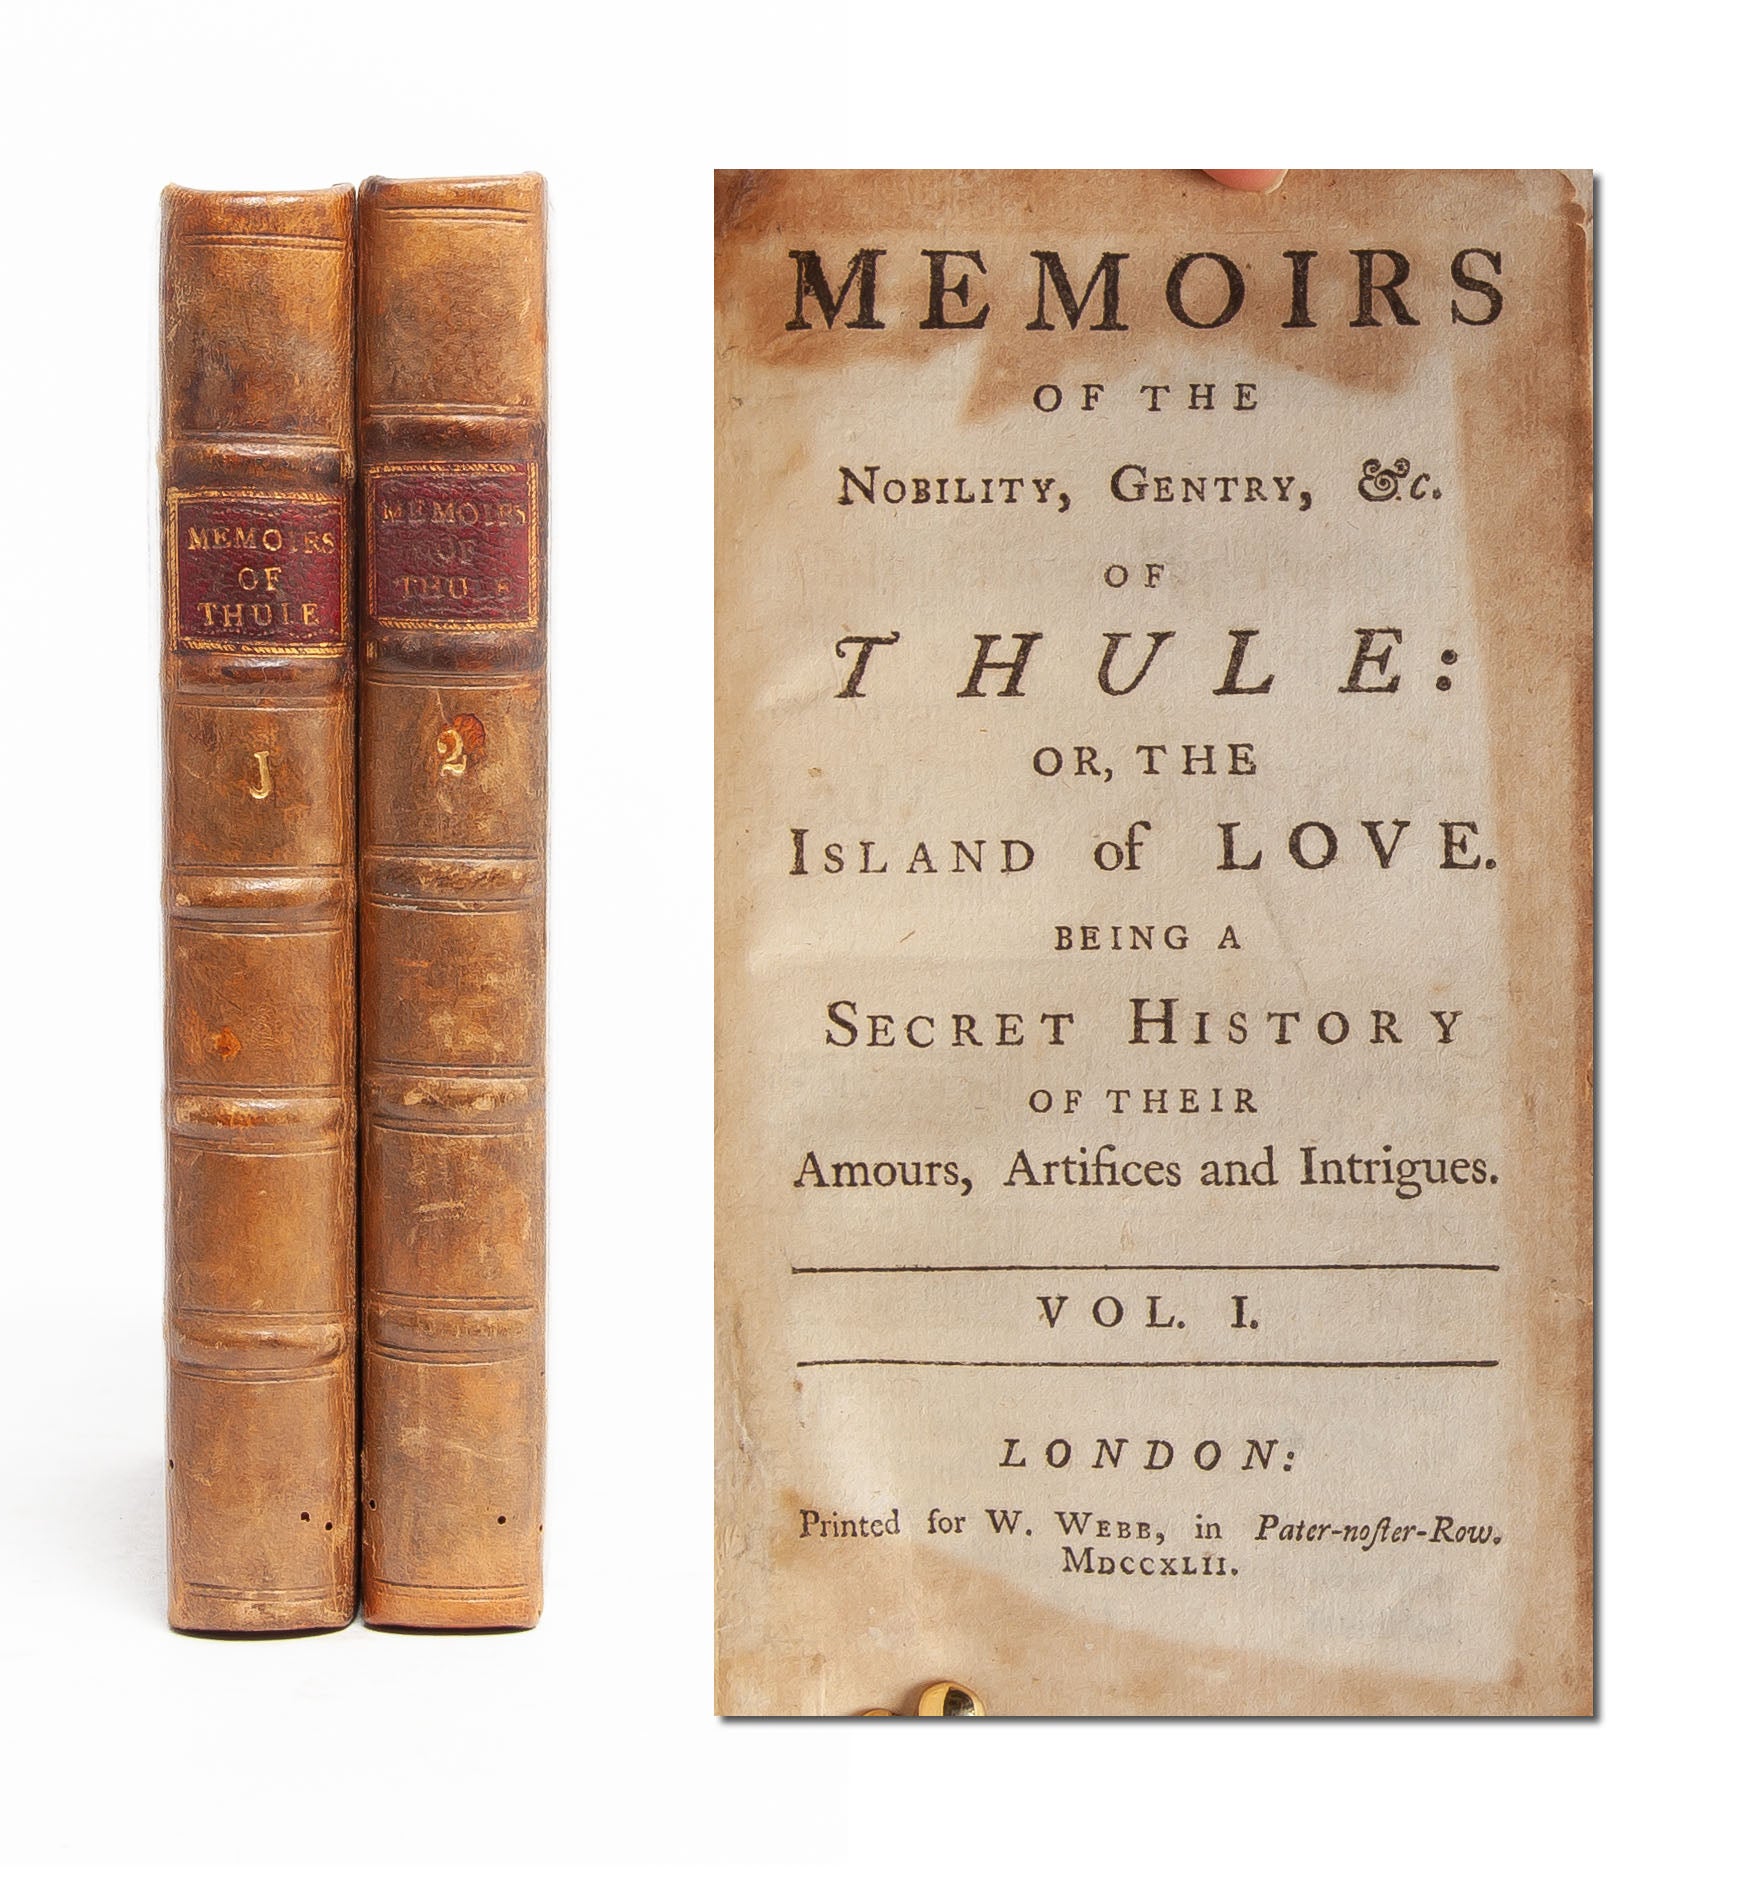 (Item #5133) Memoirs of the Nobility, Gentry &c. of Thule: or, The Island of Love. Being a Secret History of Their Amours, Artifices, and Intrigues (in 2 vols.). Erotic Literature, Fantosme, Sex Work.